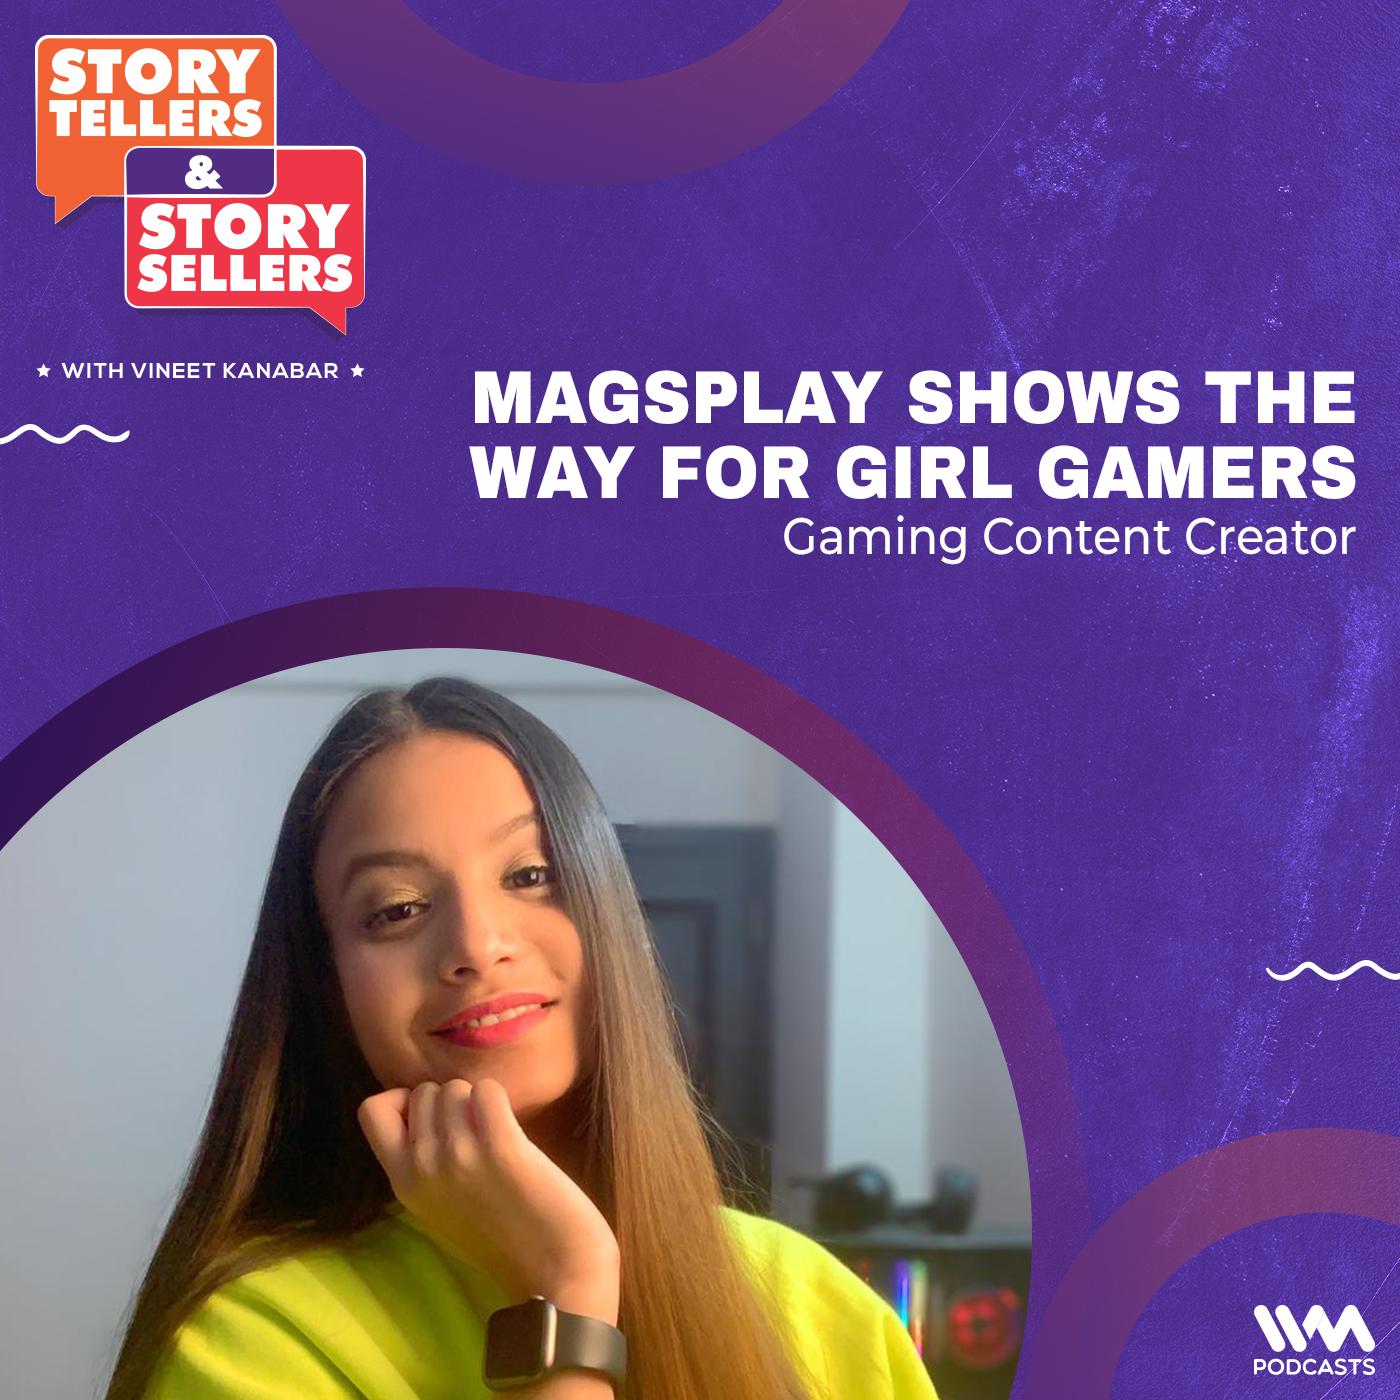 Magsplay Shows the Way for Girl Gamers